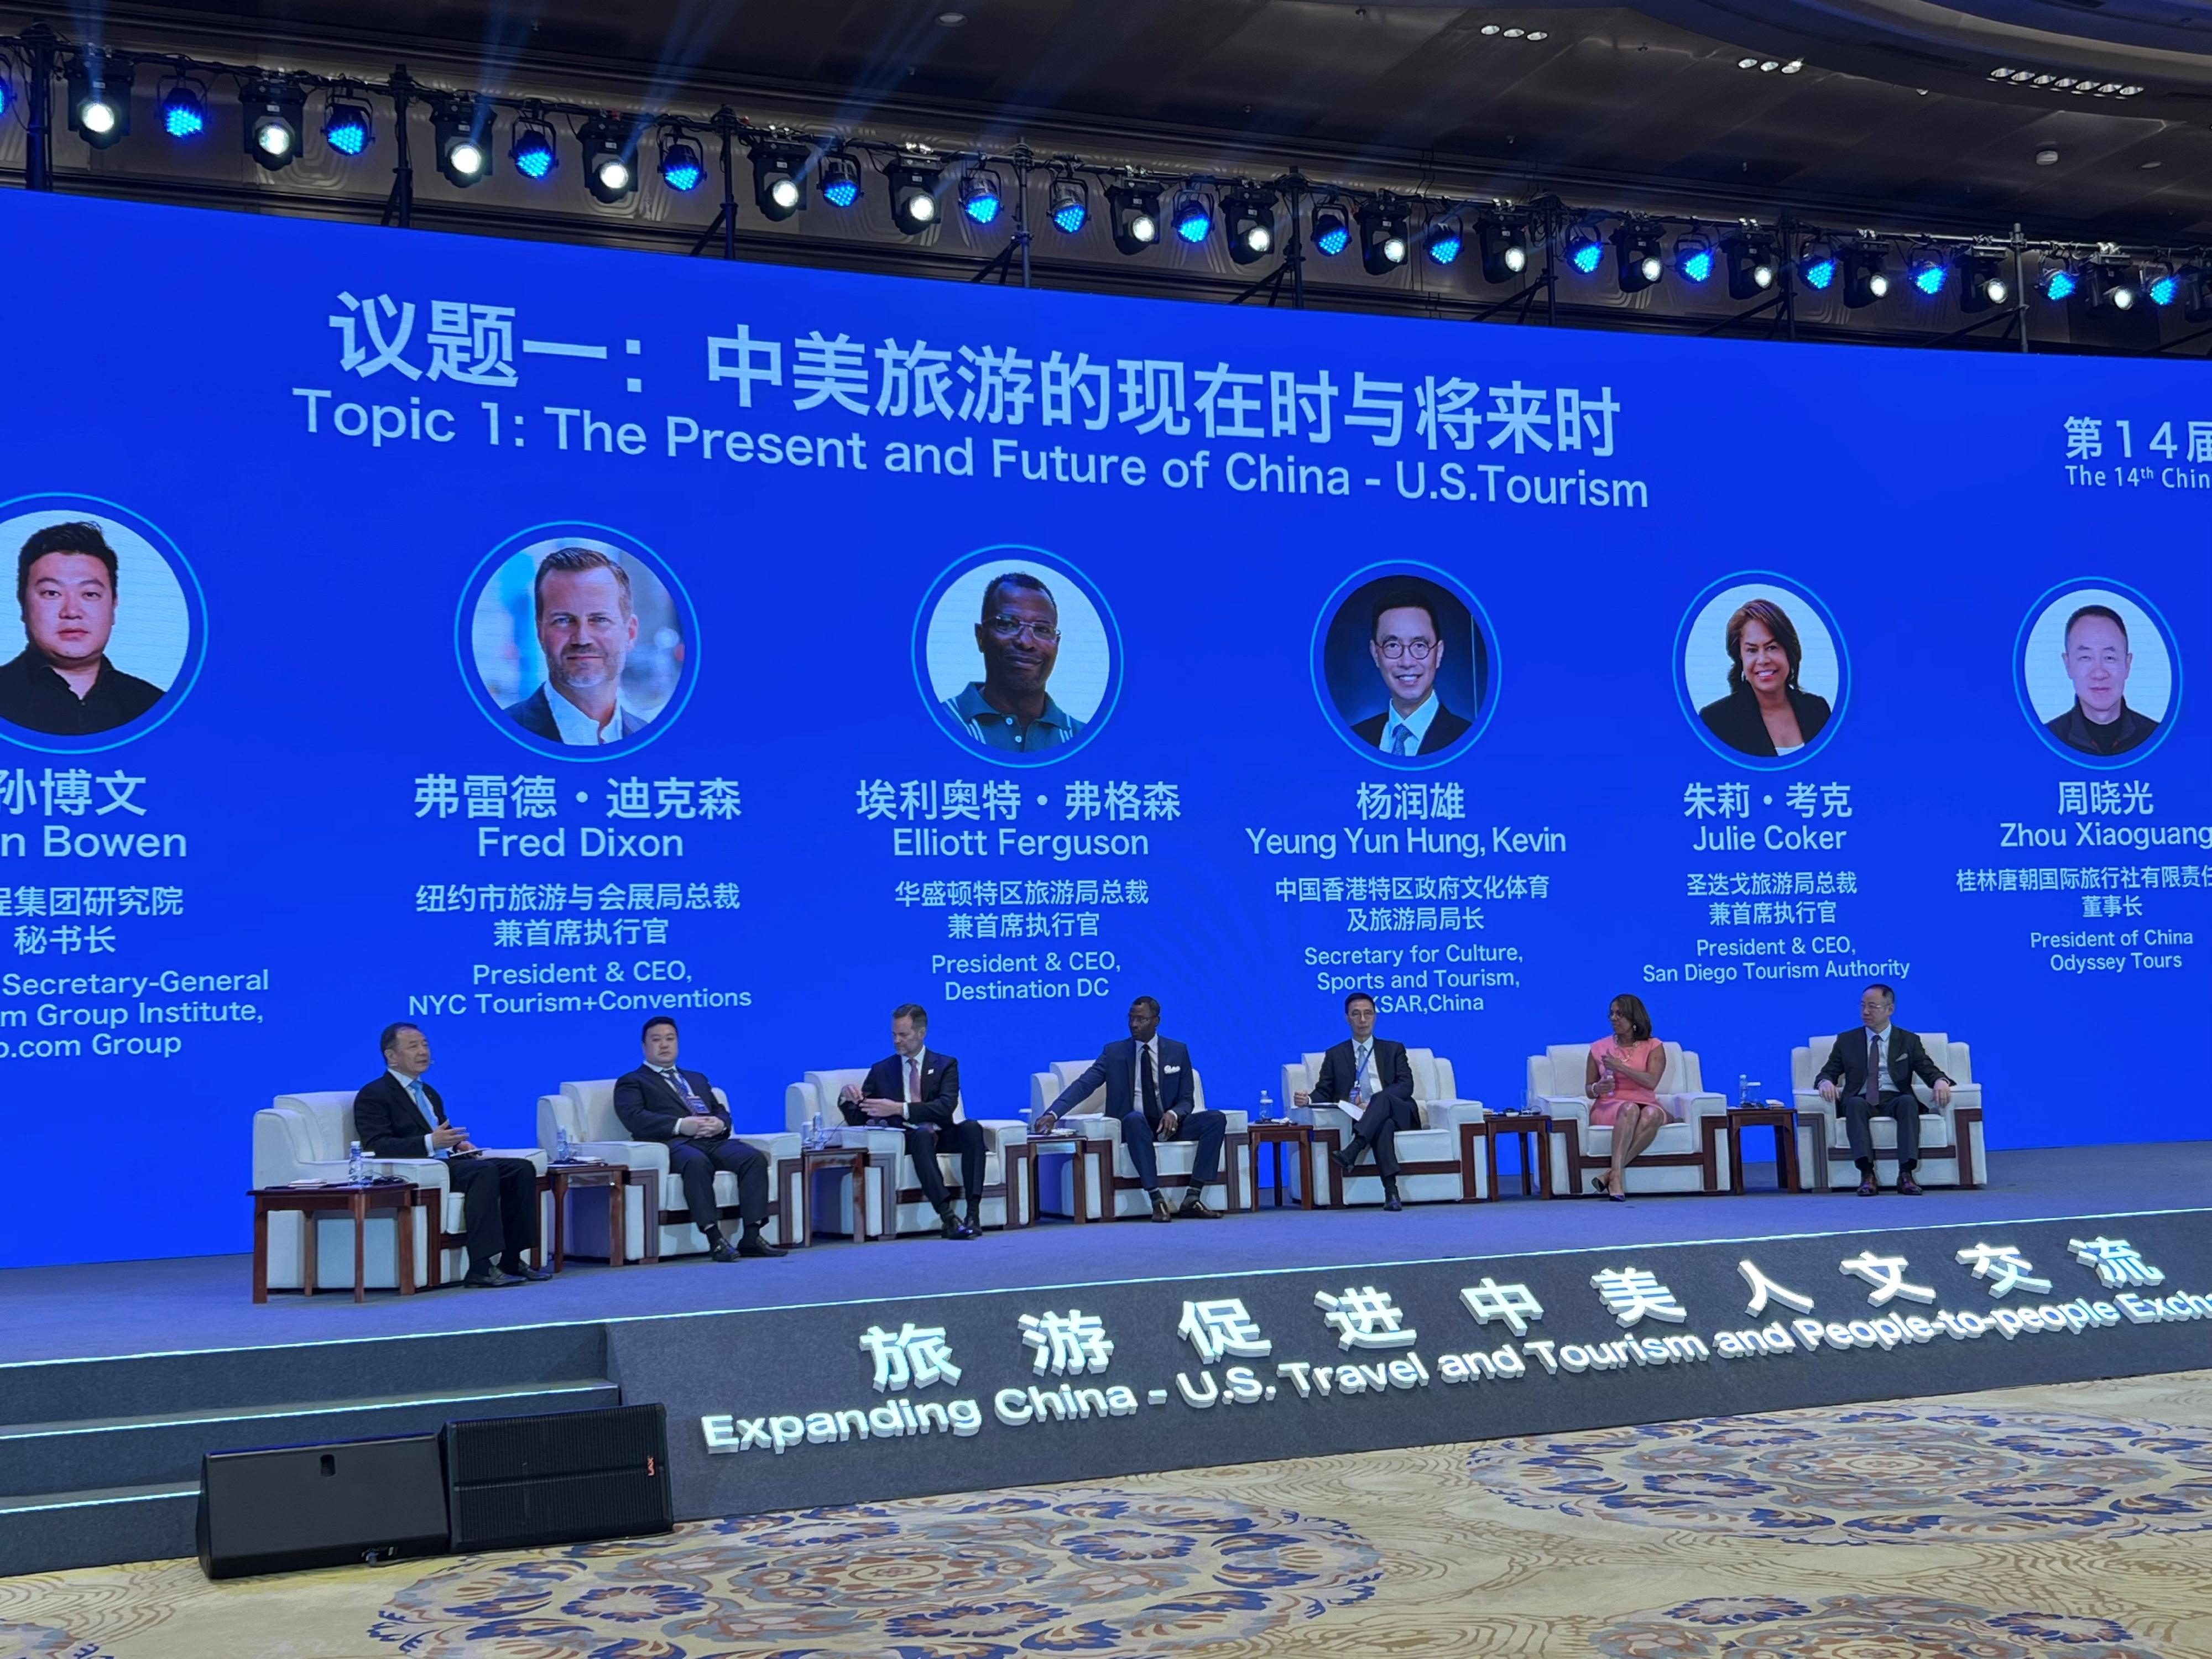 The Secretary for Culture, Sports and Tourism, Mr Kevin Yeung attended the 14th China-U.S. Tourism Leadership Summit in Xi'an today (May 22) at the invitation of the Ministry of Culture and Tourism. Photo shows Mr Yeung (third right) participating in a panel discussion.